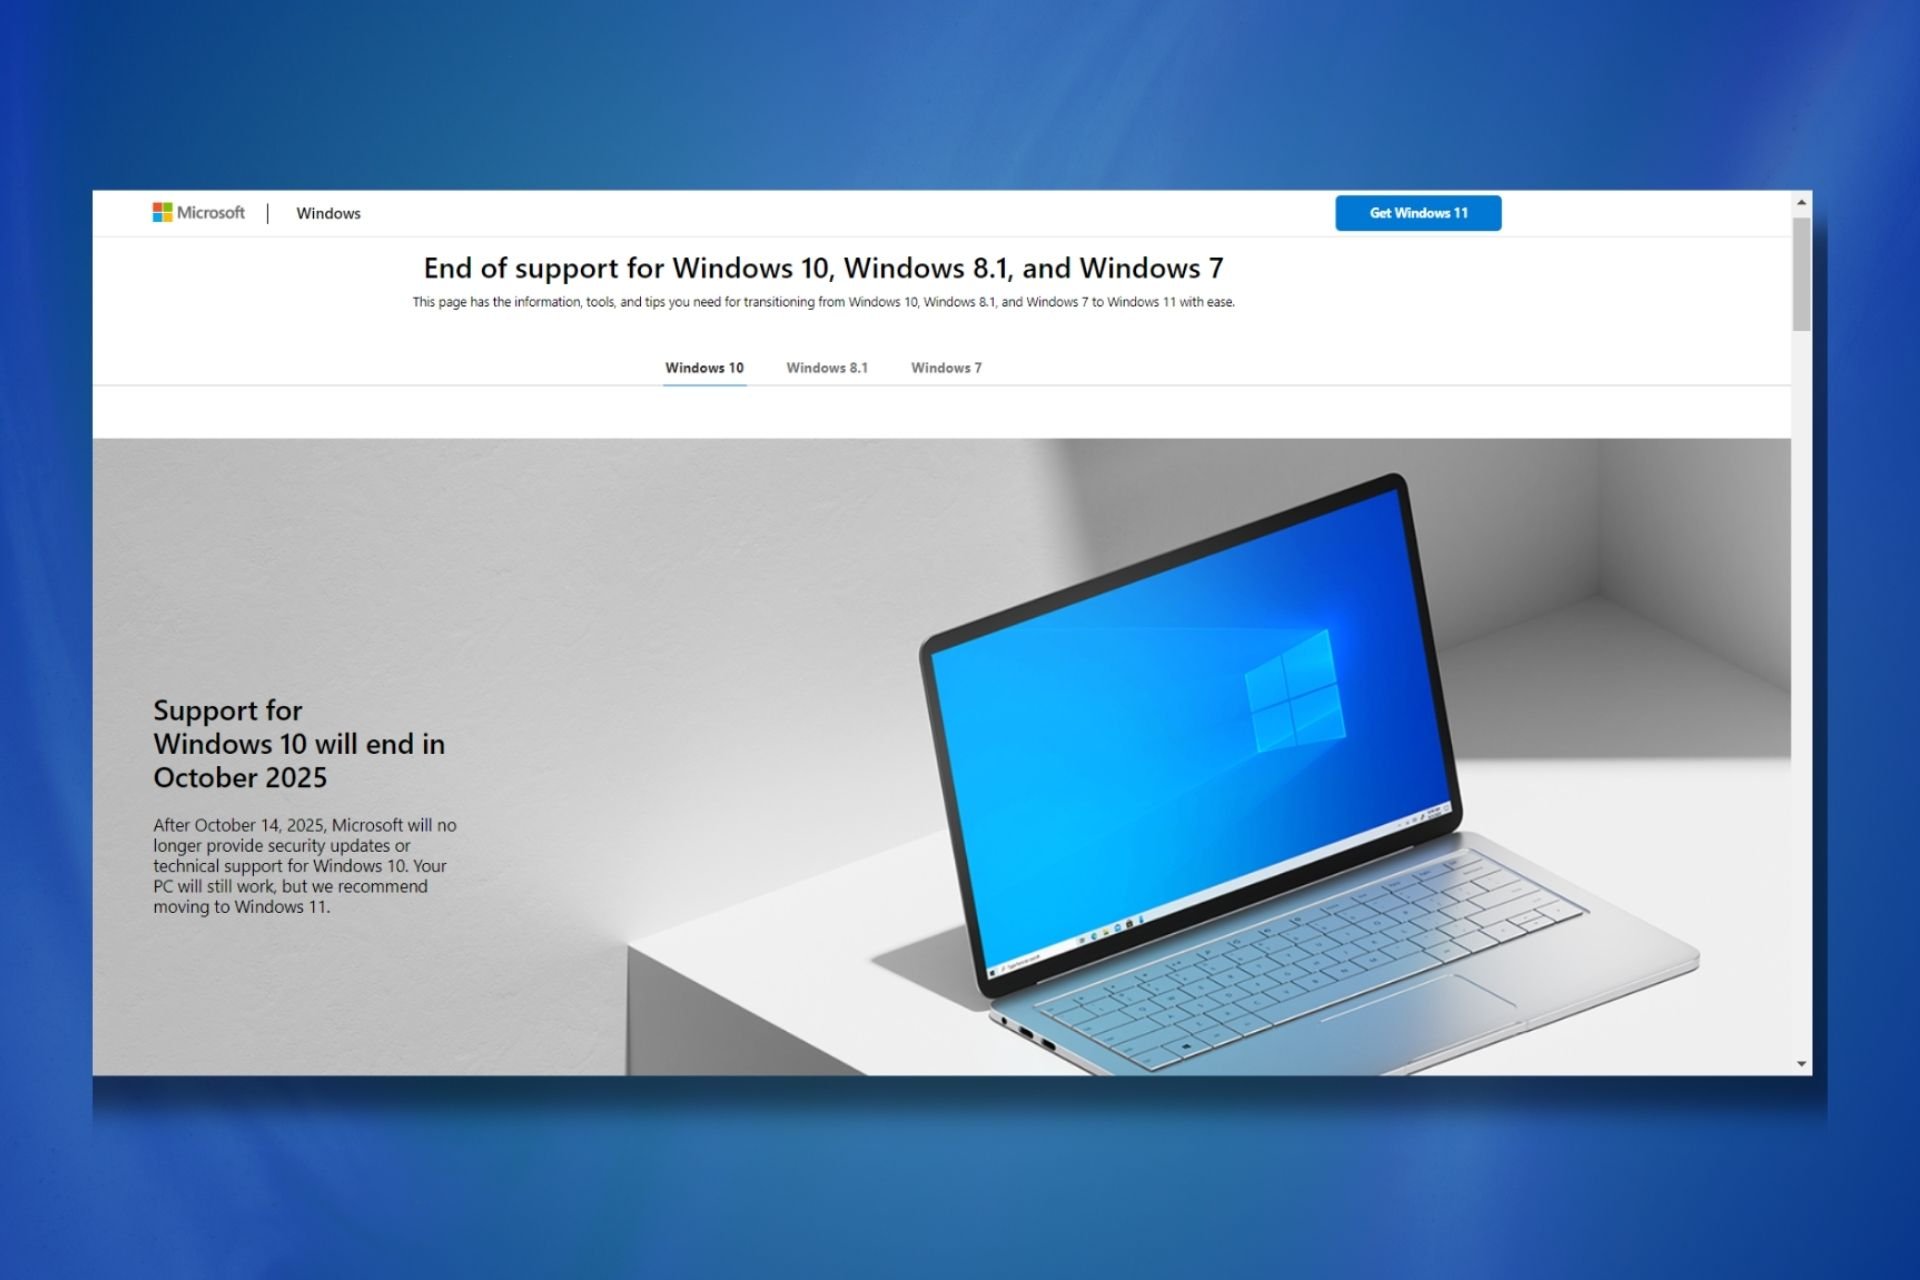 Microsoft's new end-of-support page gives a gentle reminder of Windows 10's death